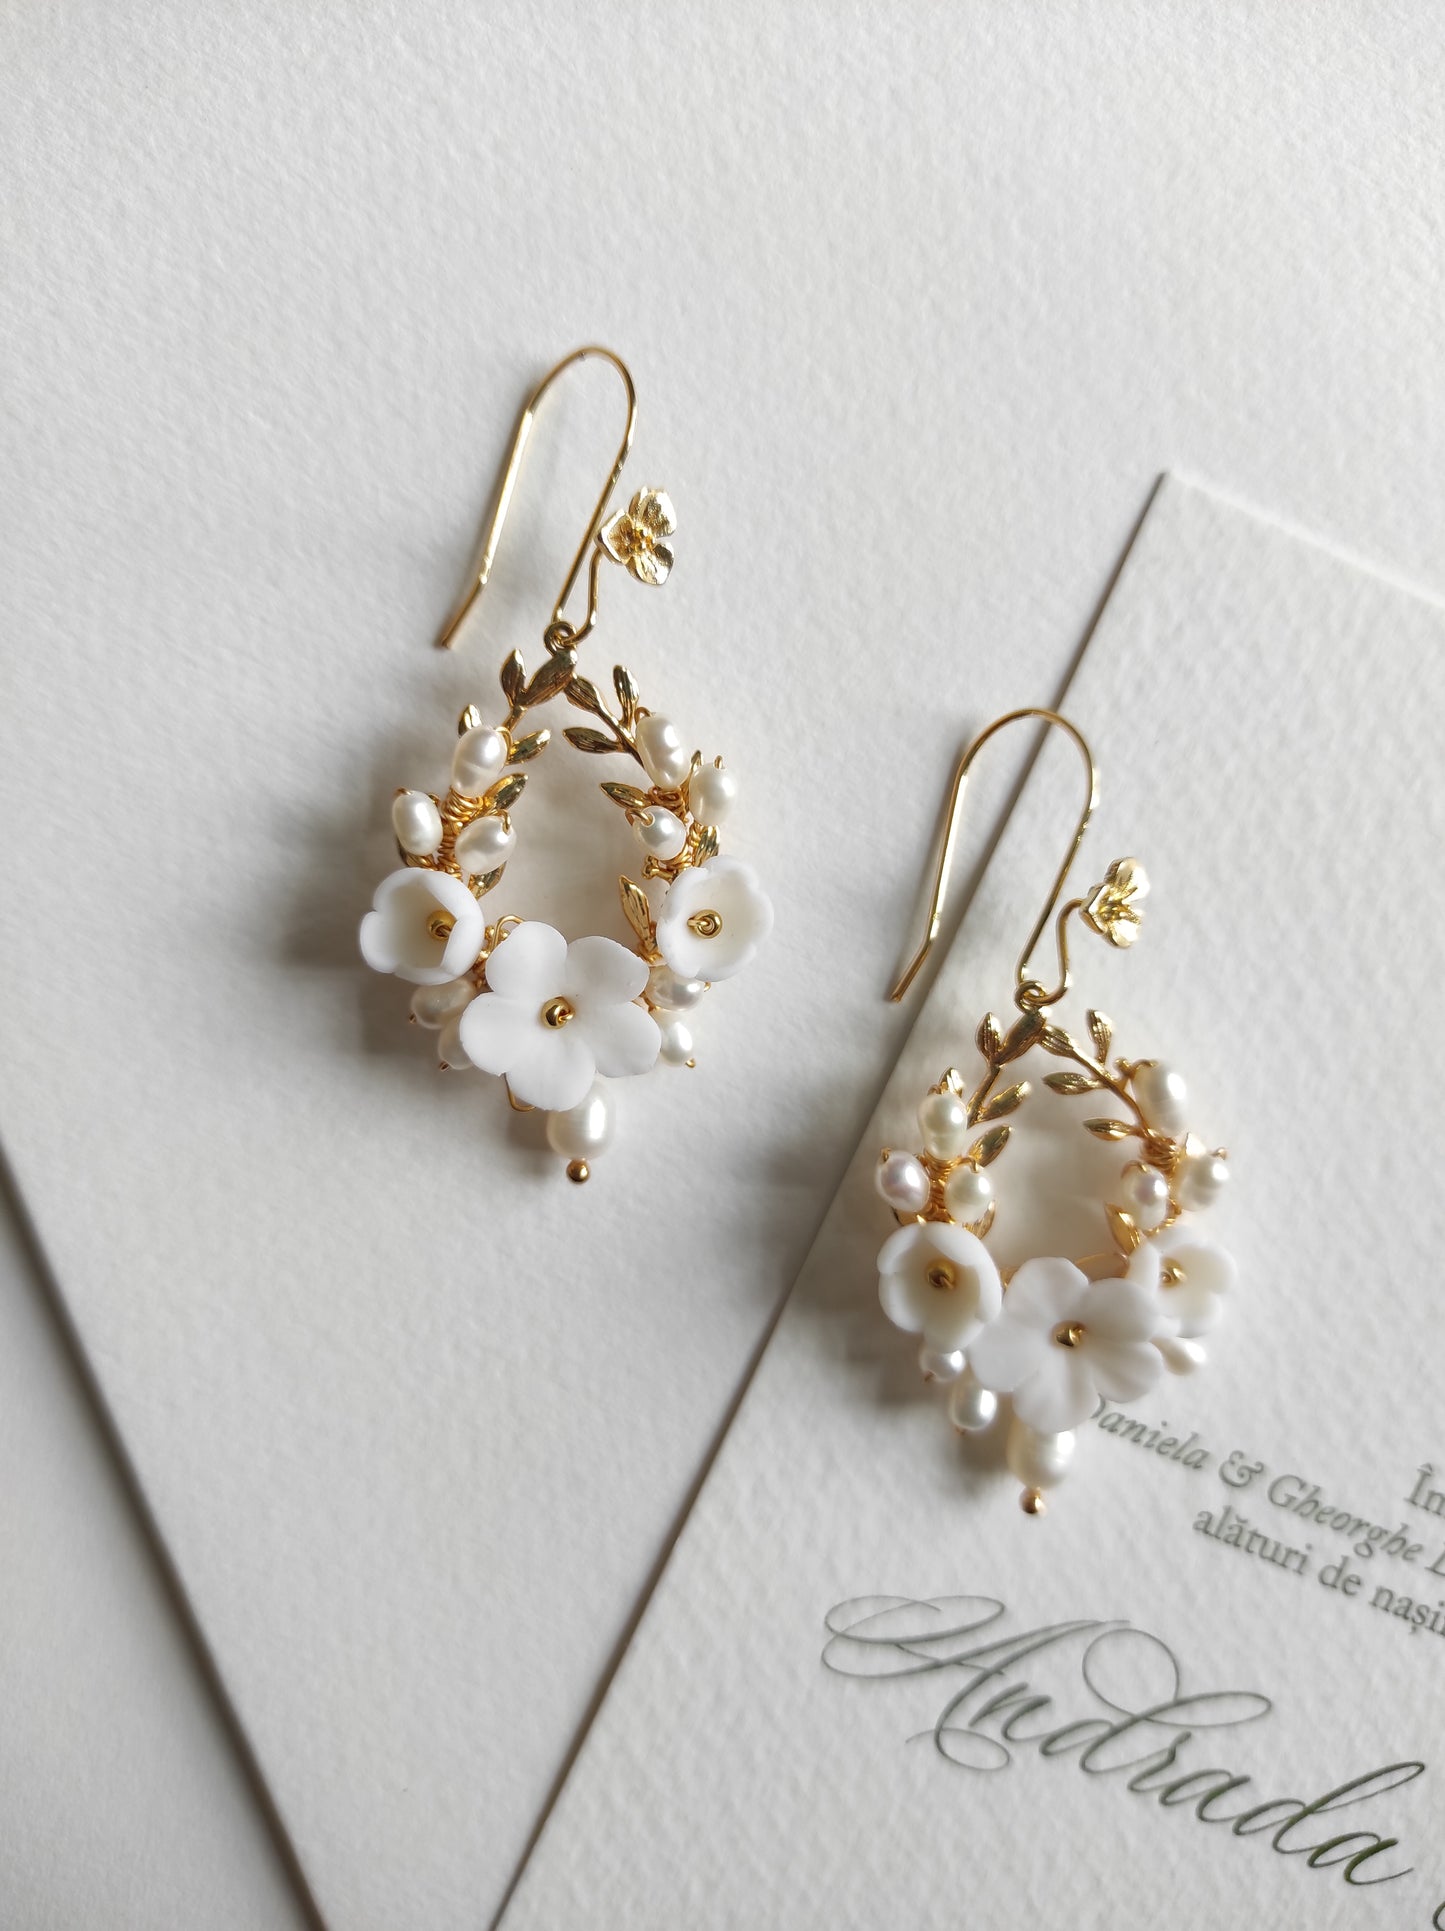 LILLY BRIDAL EARRINGS - Wedding jewelry / Bridal jewelry / Wedding earrings / Gift for her / Bridesmaid gift / Engagement earrings